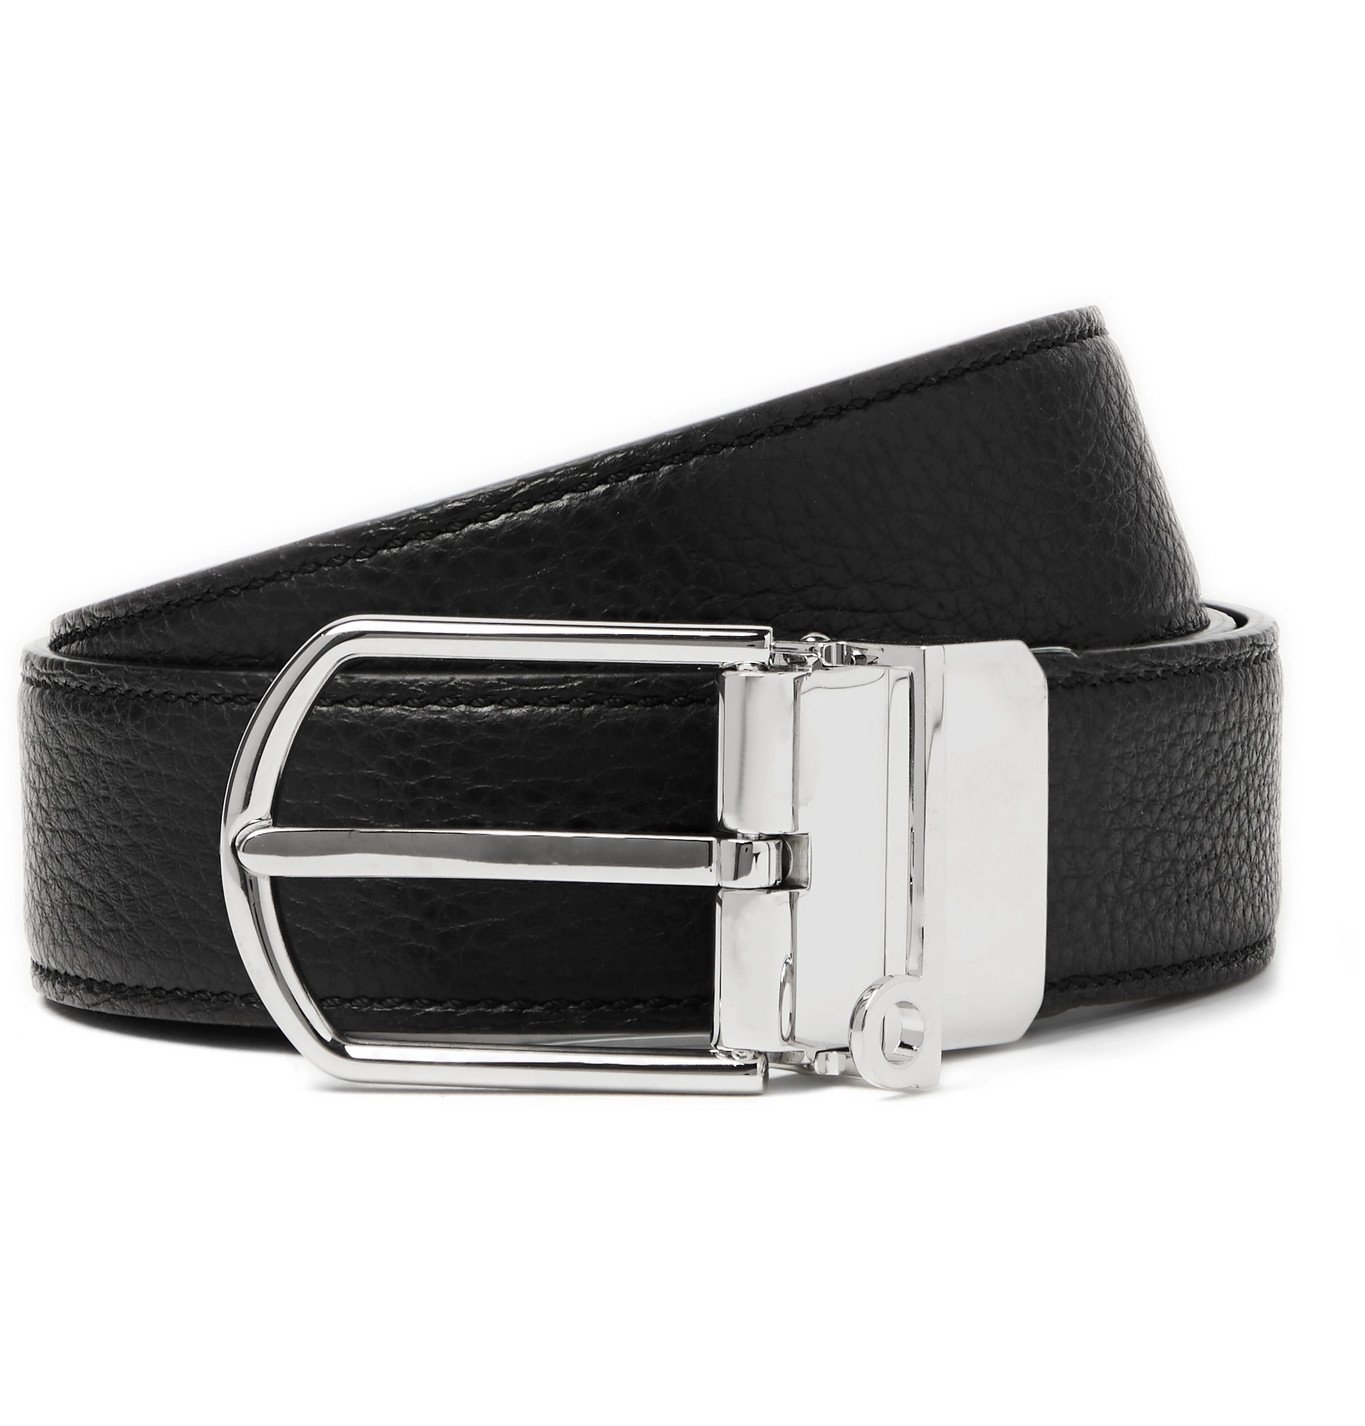 Dunhill - 3cm Reversible Smooth and Full-Grain Leather Belt - Black Dunhill